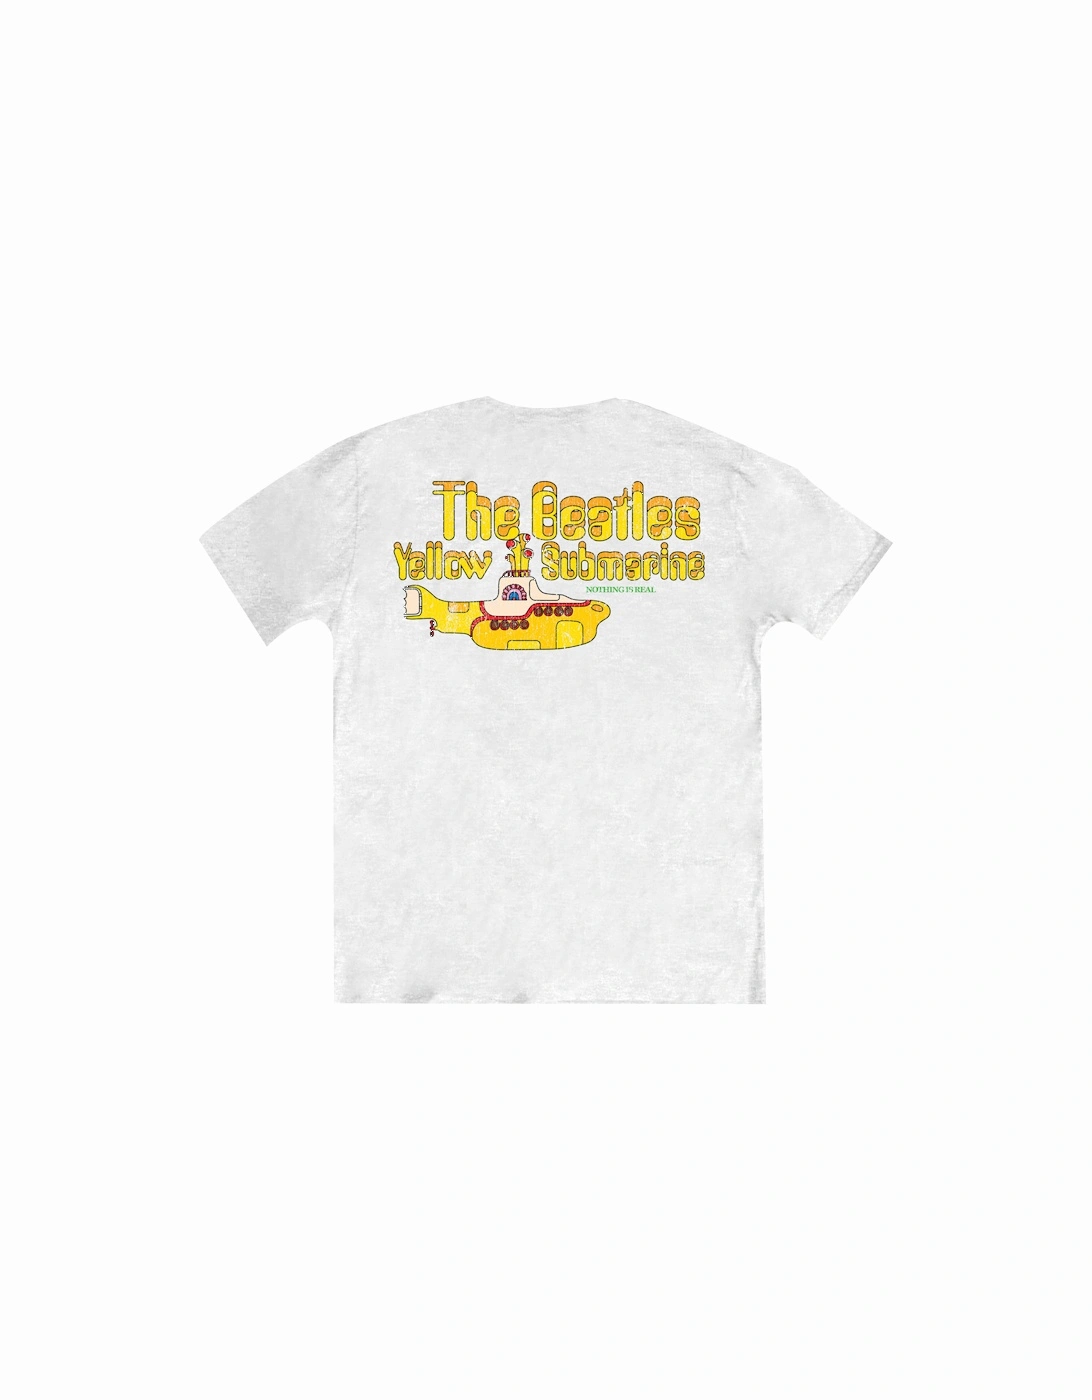 Unisex Adult Yellow Submarine Nothing Is Real T-Shirt